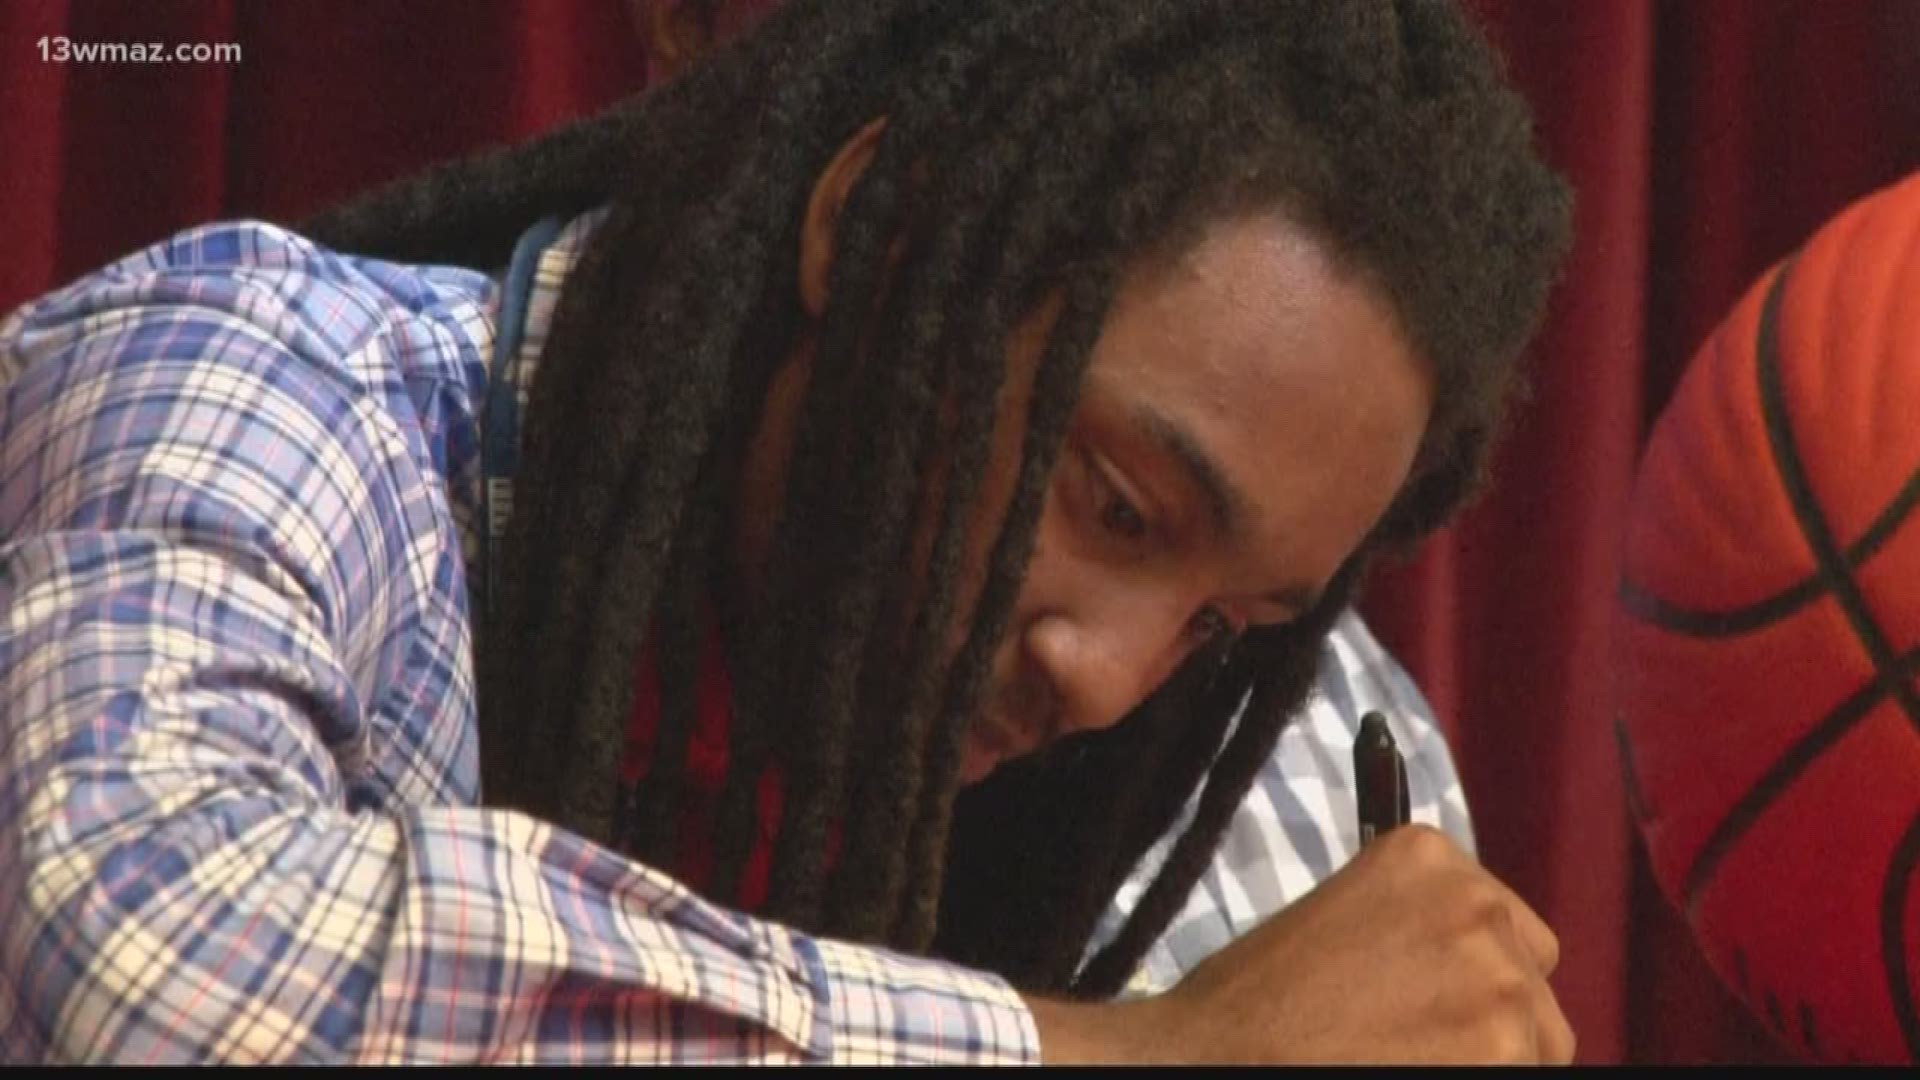 Northeast High School is celebrating one of their top players. Tuesday morning, friends and family gathered together to see basketball player Darius Dunn officially sign to Pitt Community College in Winterville, North Carolina.